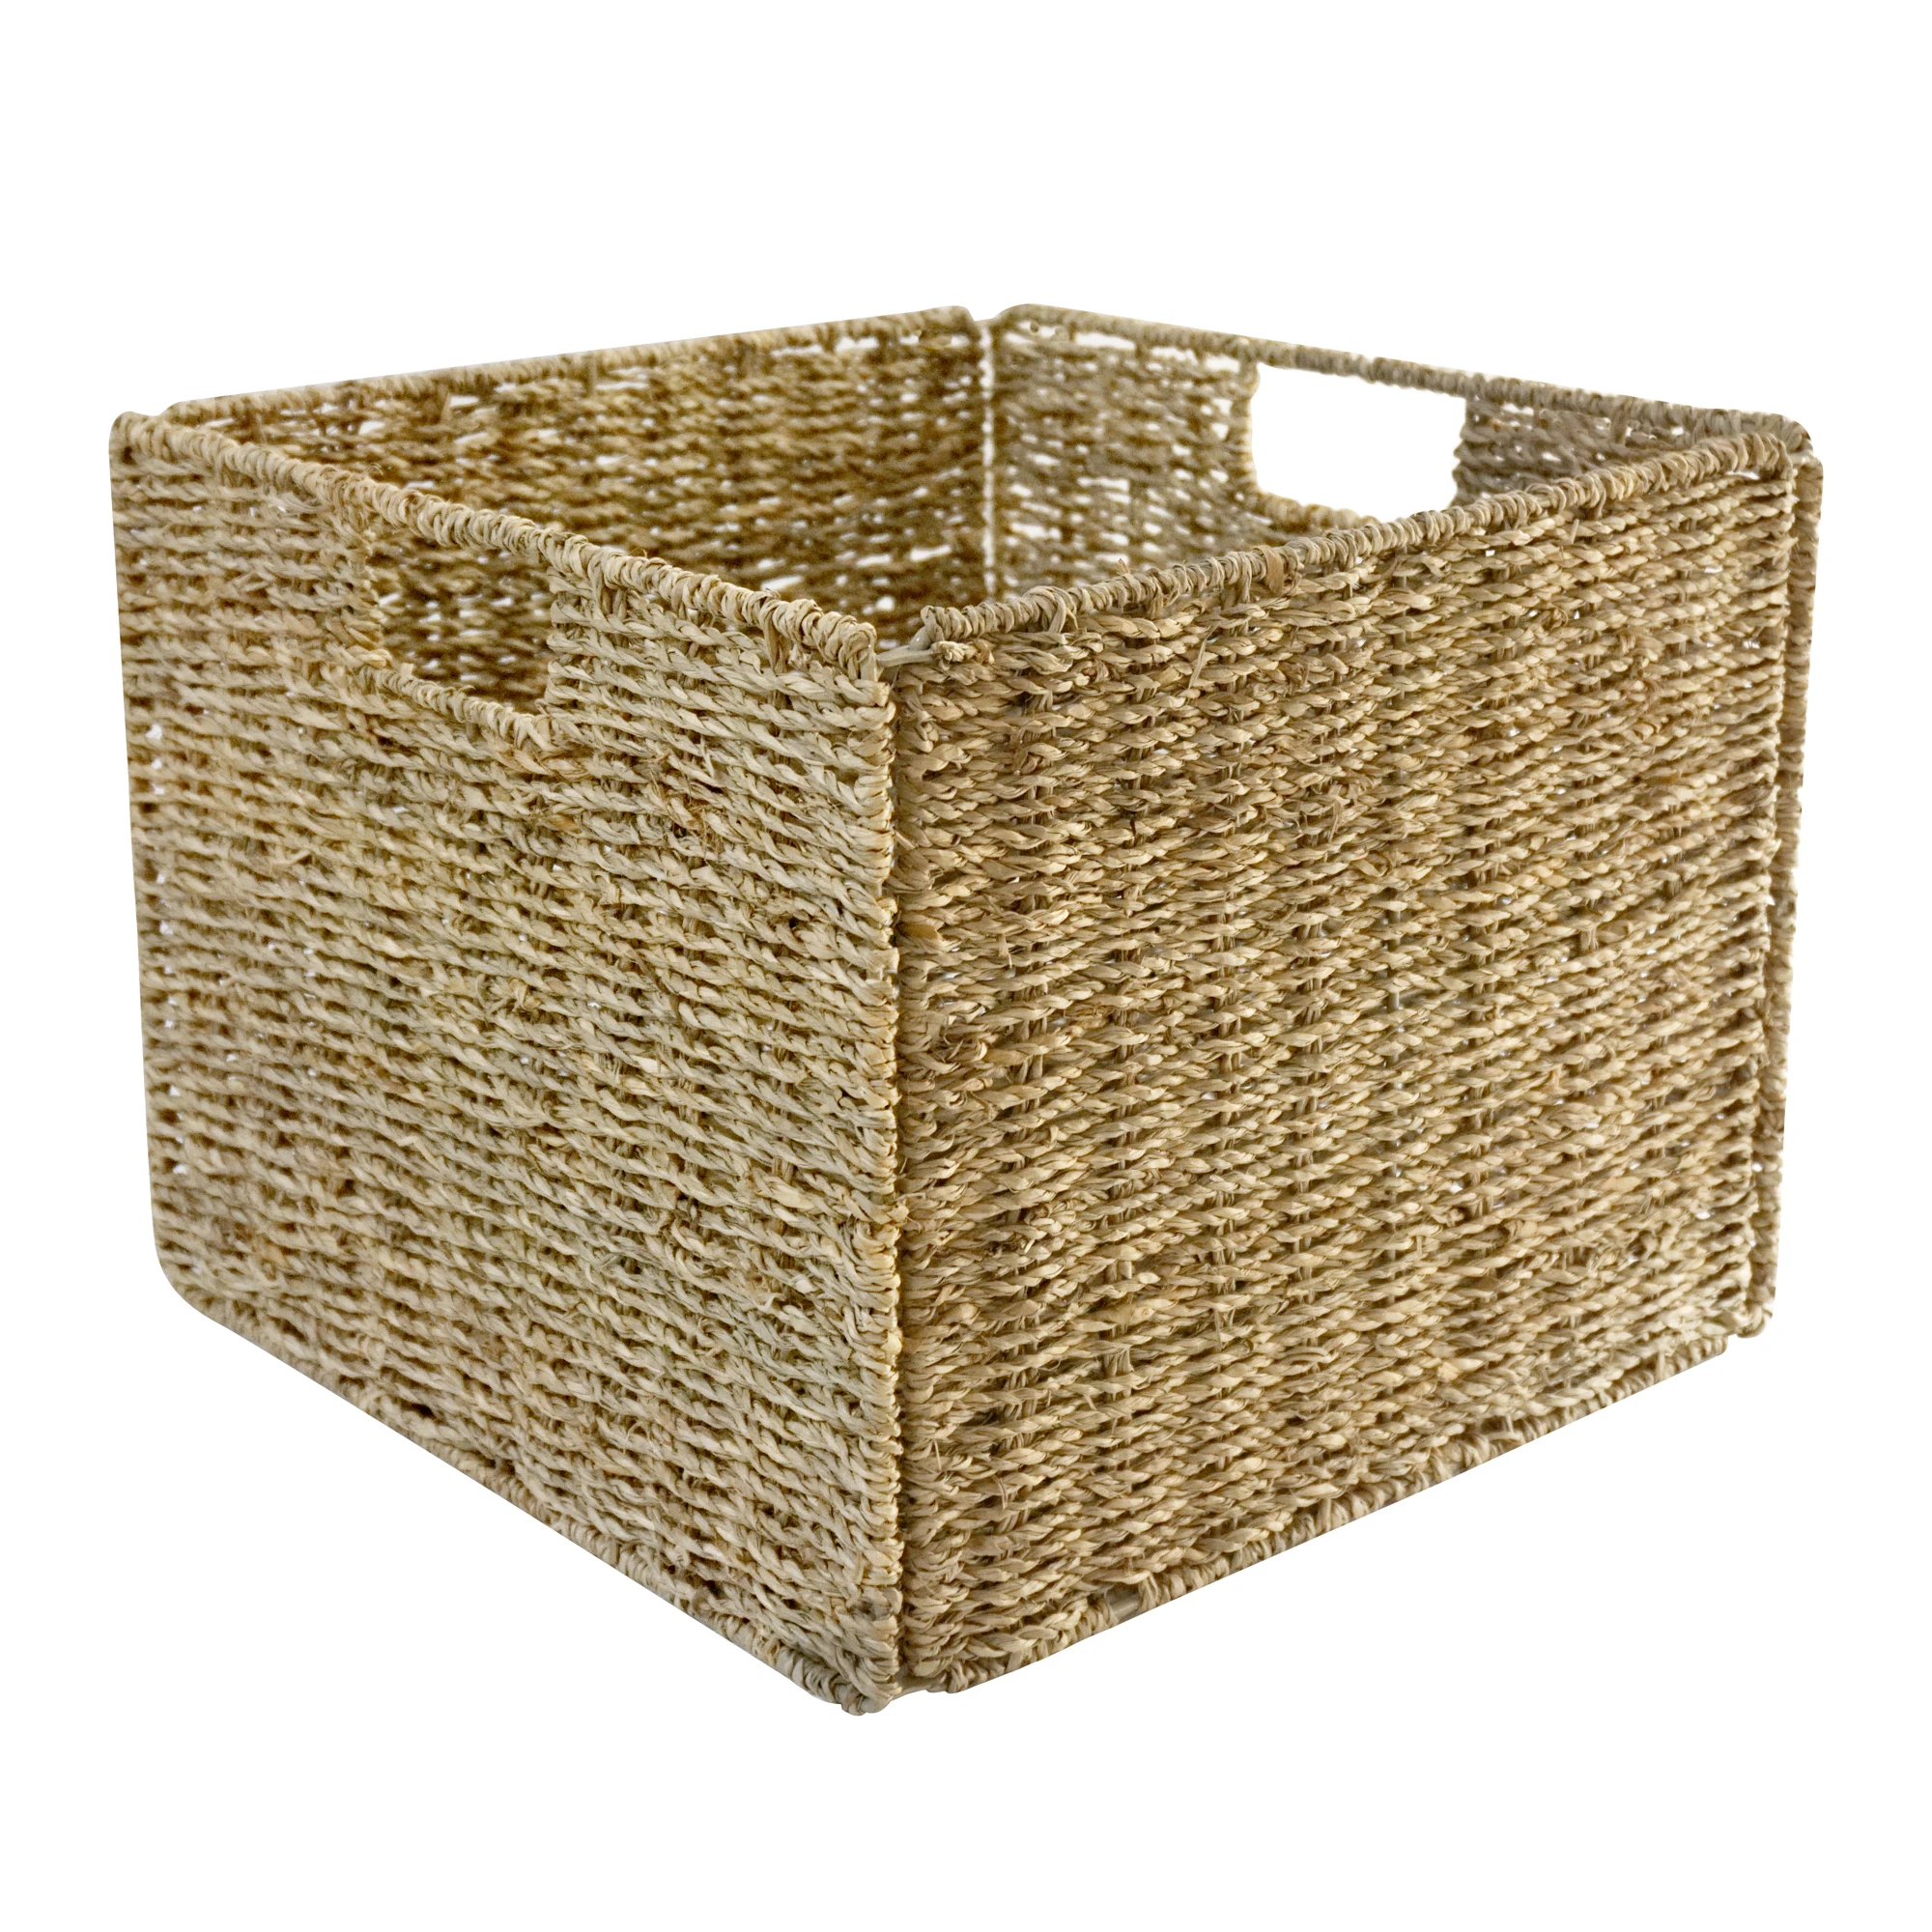 

XH Ready to ship 13 inch Handmade collapsible folding seagrass woven storage basket with inside handles for shelf